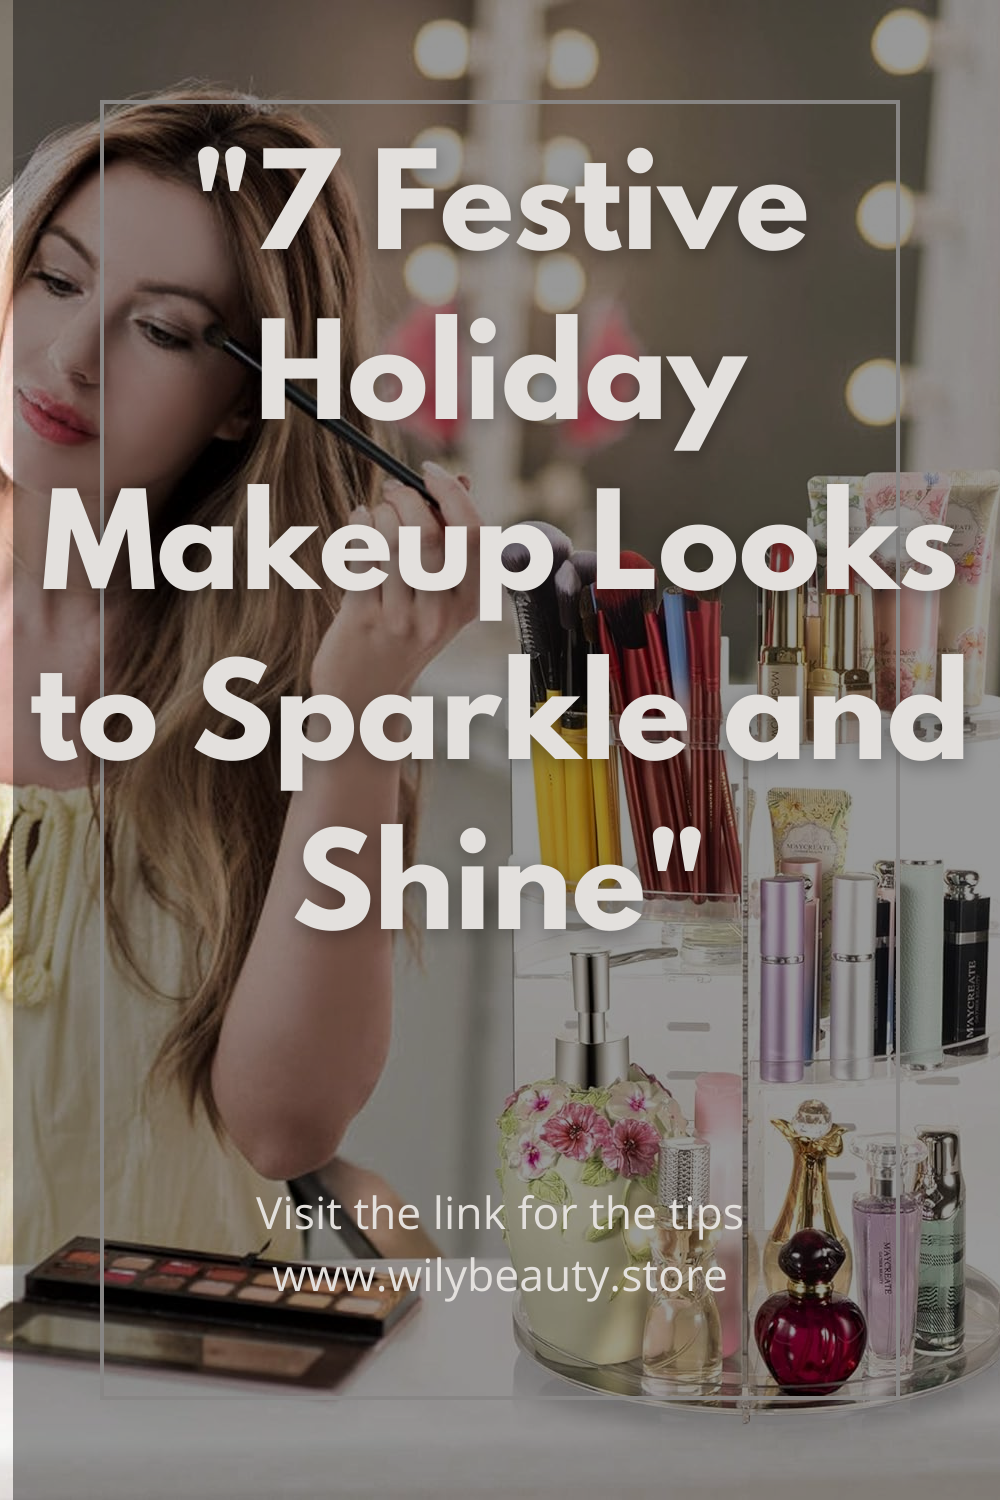 "7 Festive Holiday Makeup Looks to Sparkle and Shine"